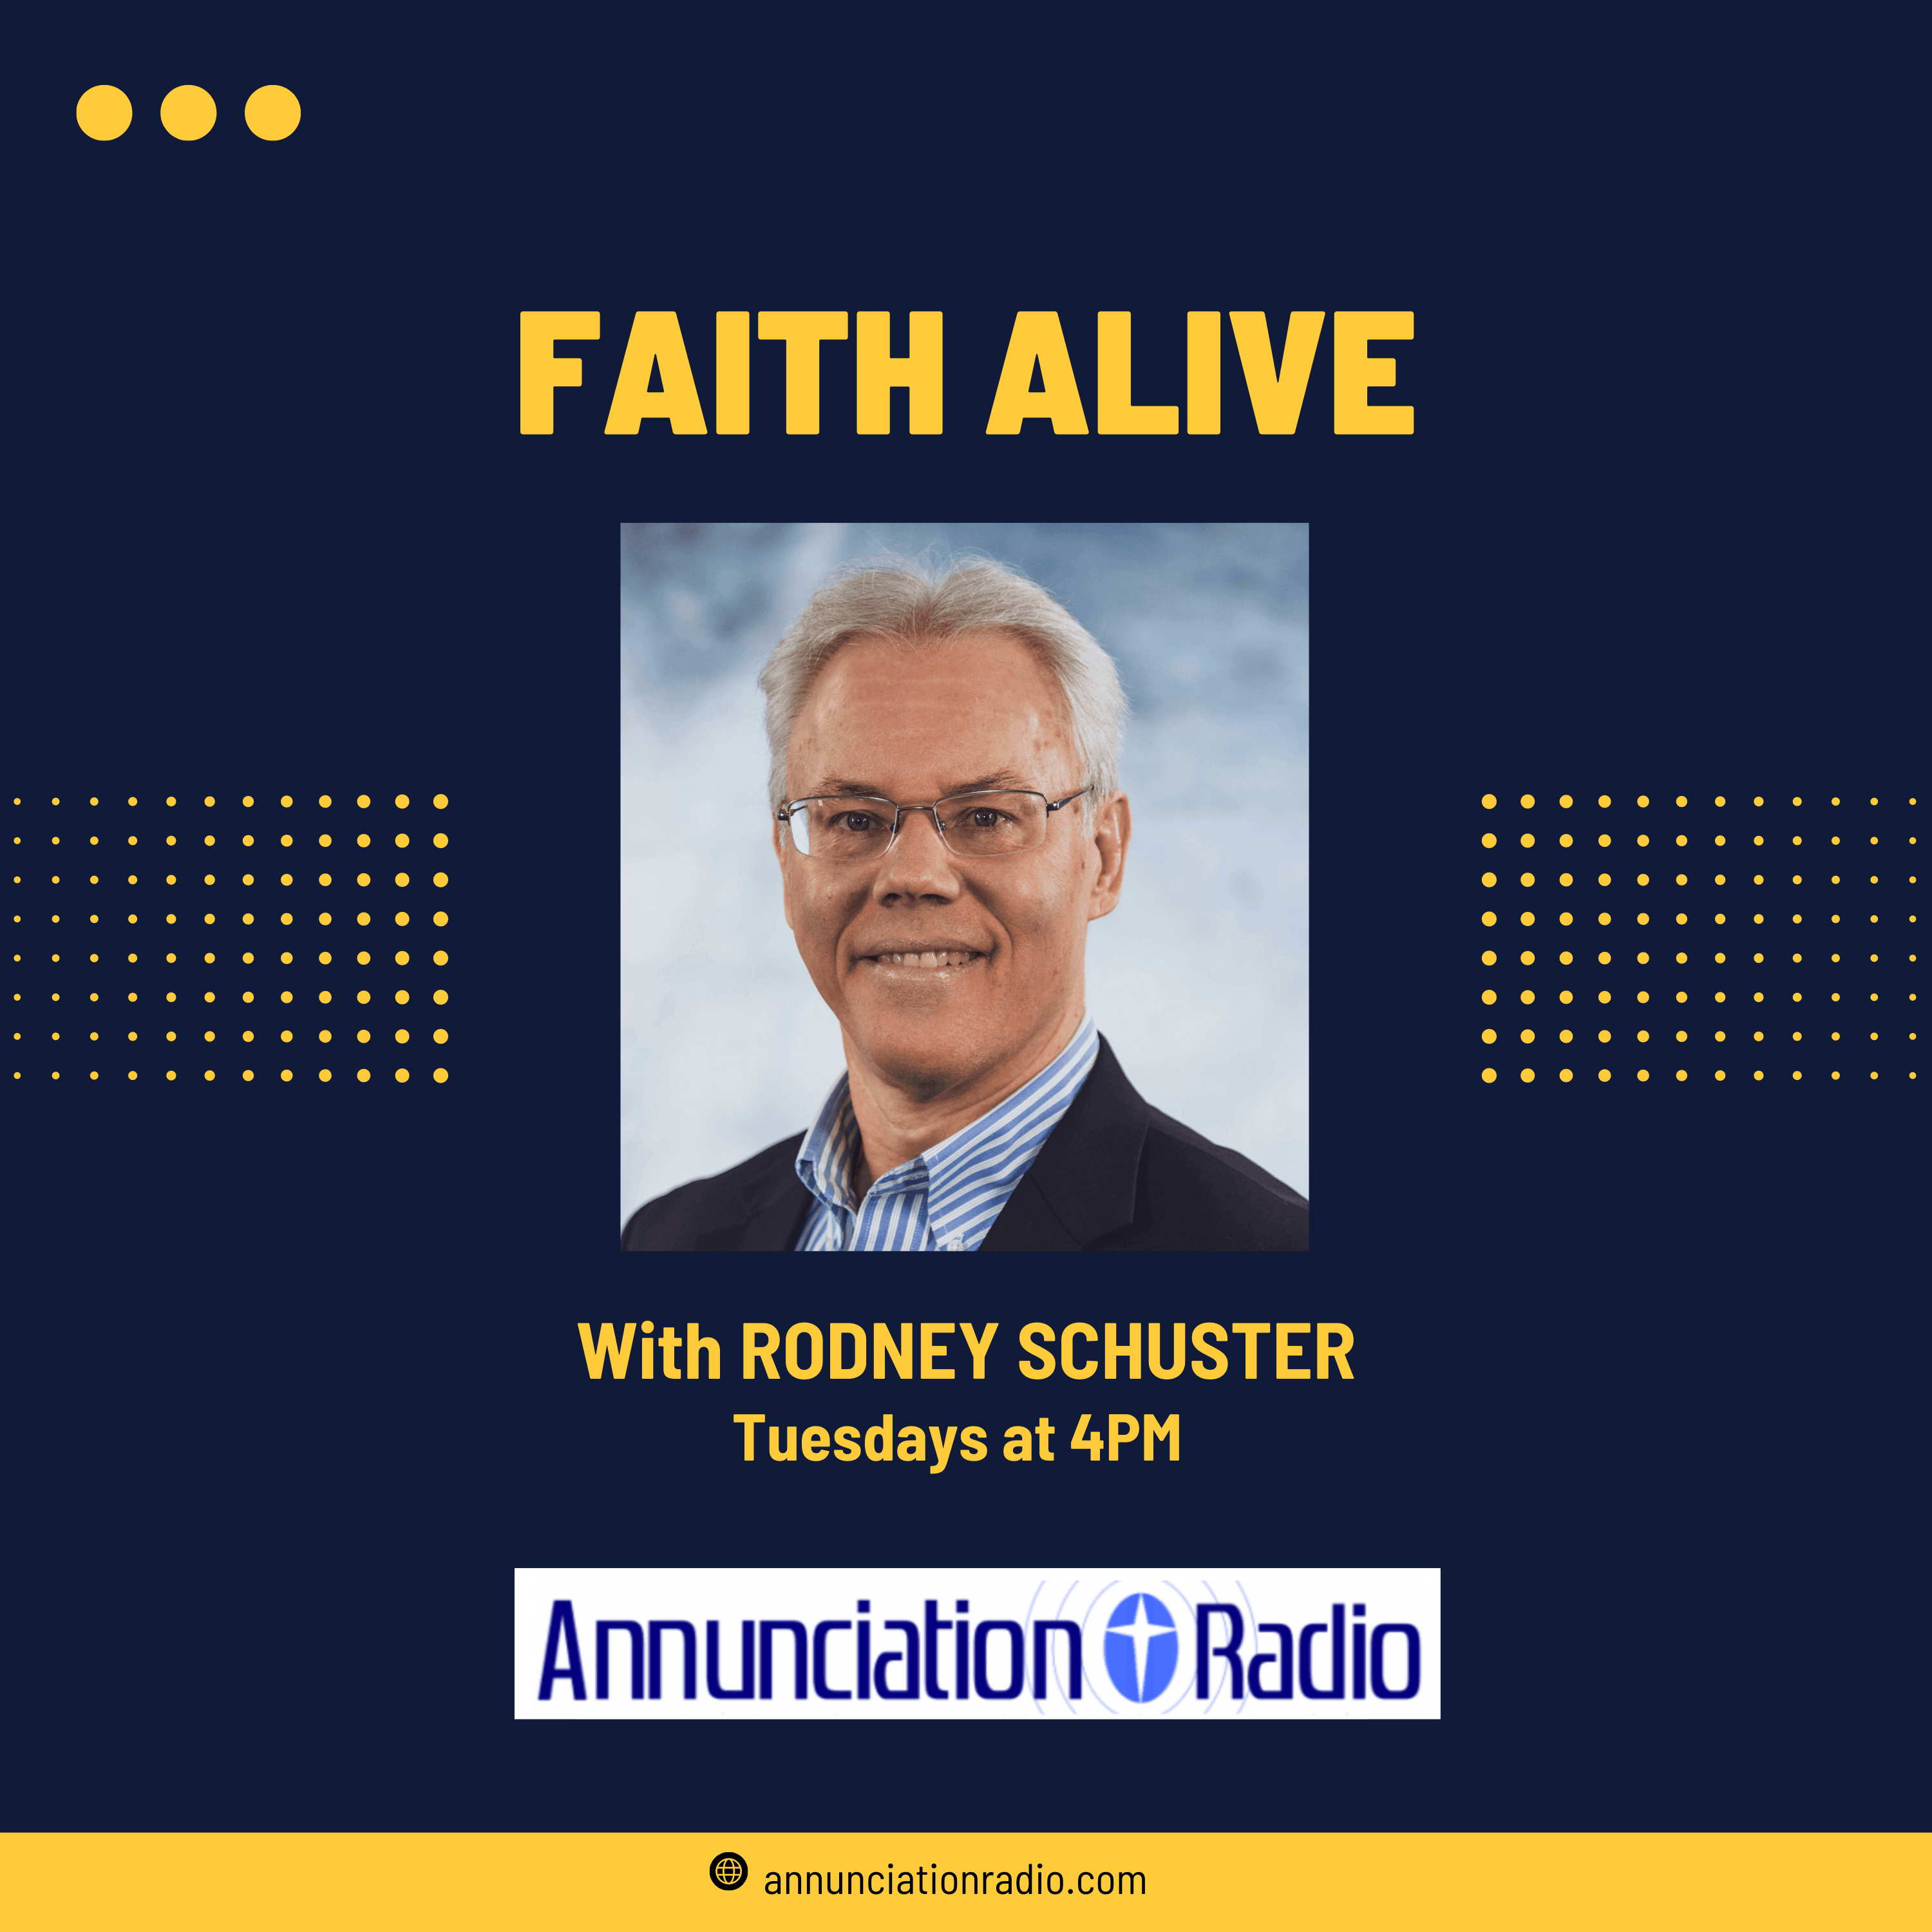 Listen to live and archived "Faith Alive" programs on Annunciation Radio's mobile app or on their website at https://www.annunciationradio.com/faith-alive. 